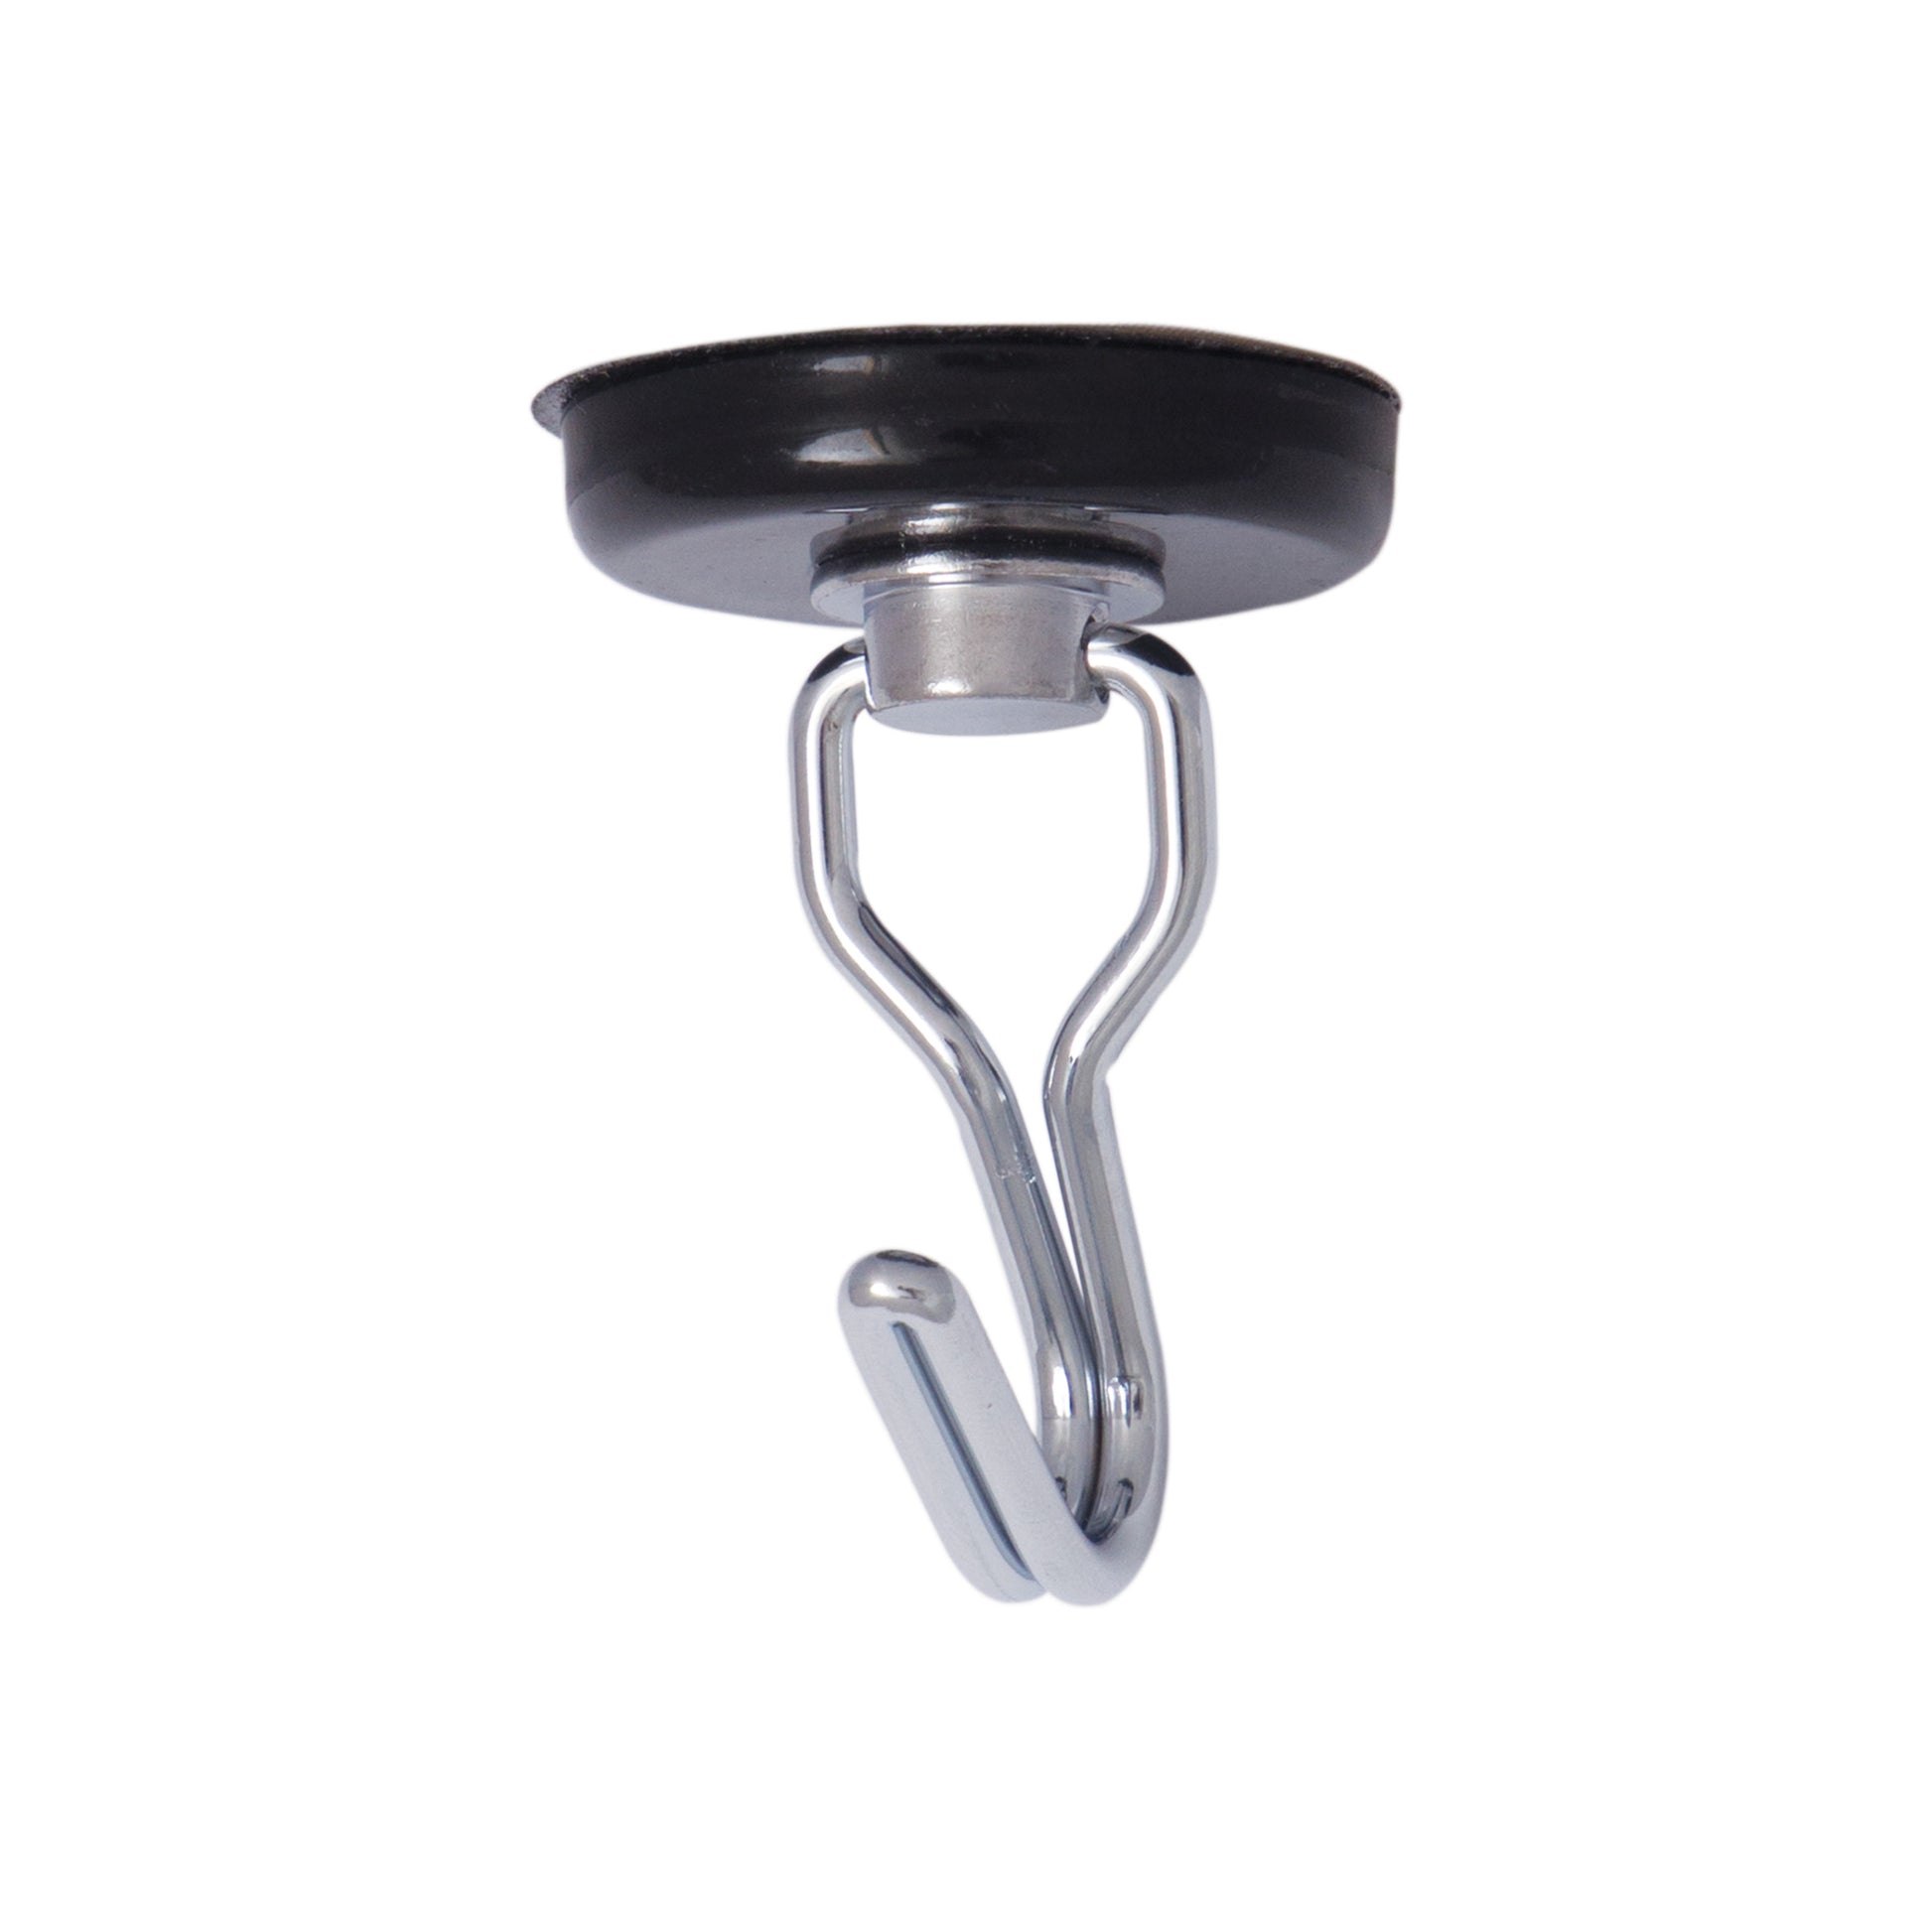 Load image into Gallery viewer, MHHH07580BX Neodymium Rotating and Swinging Magnetic Hook - 45 Degree Angle View